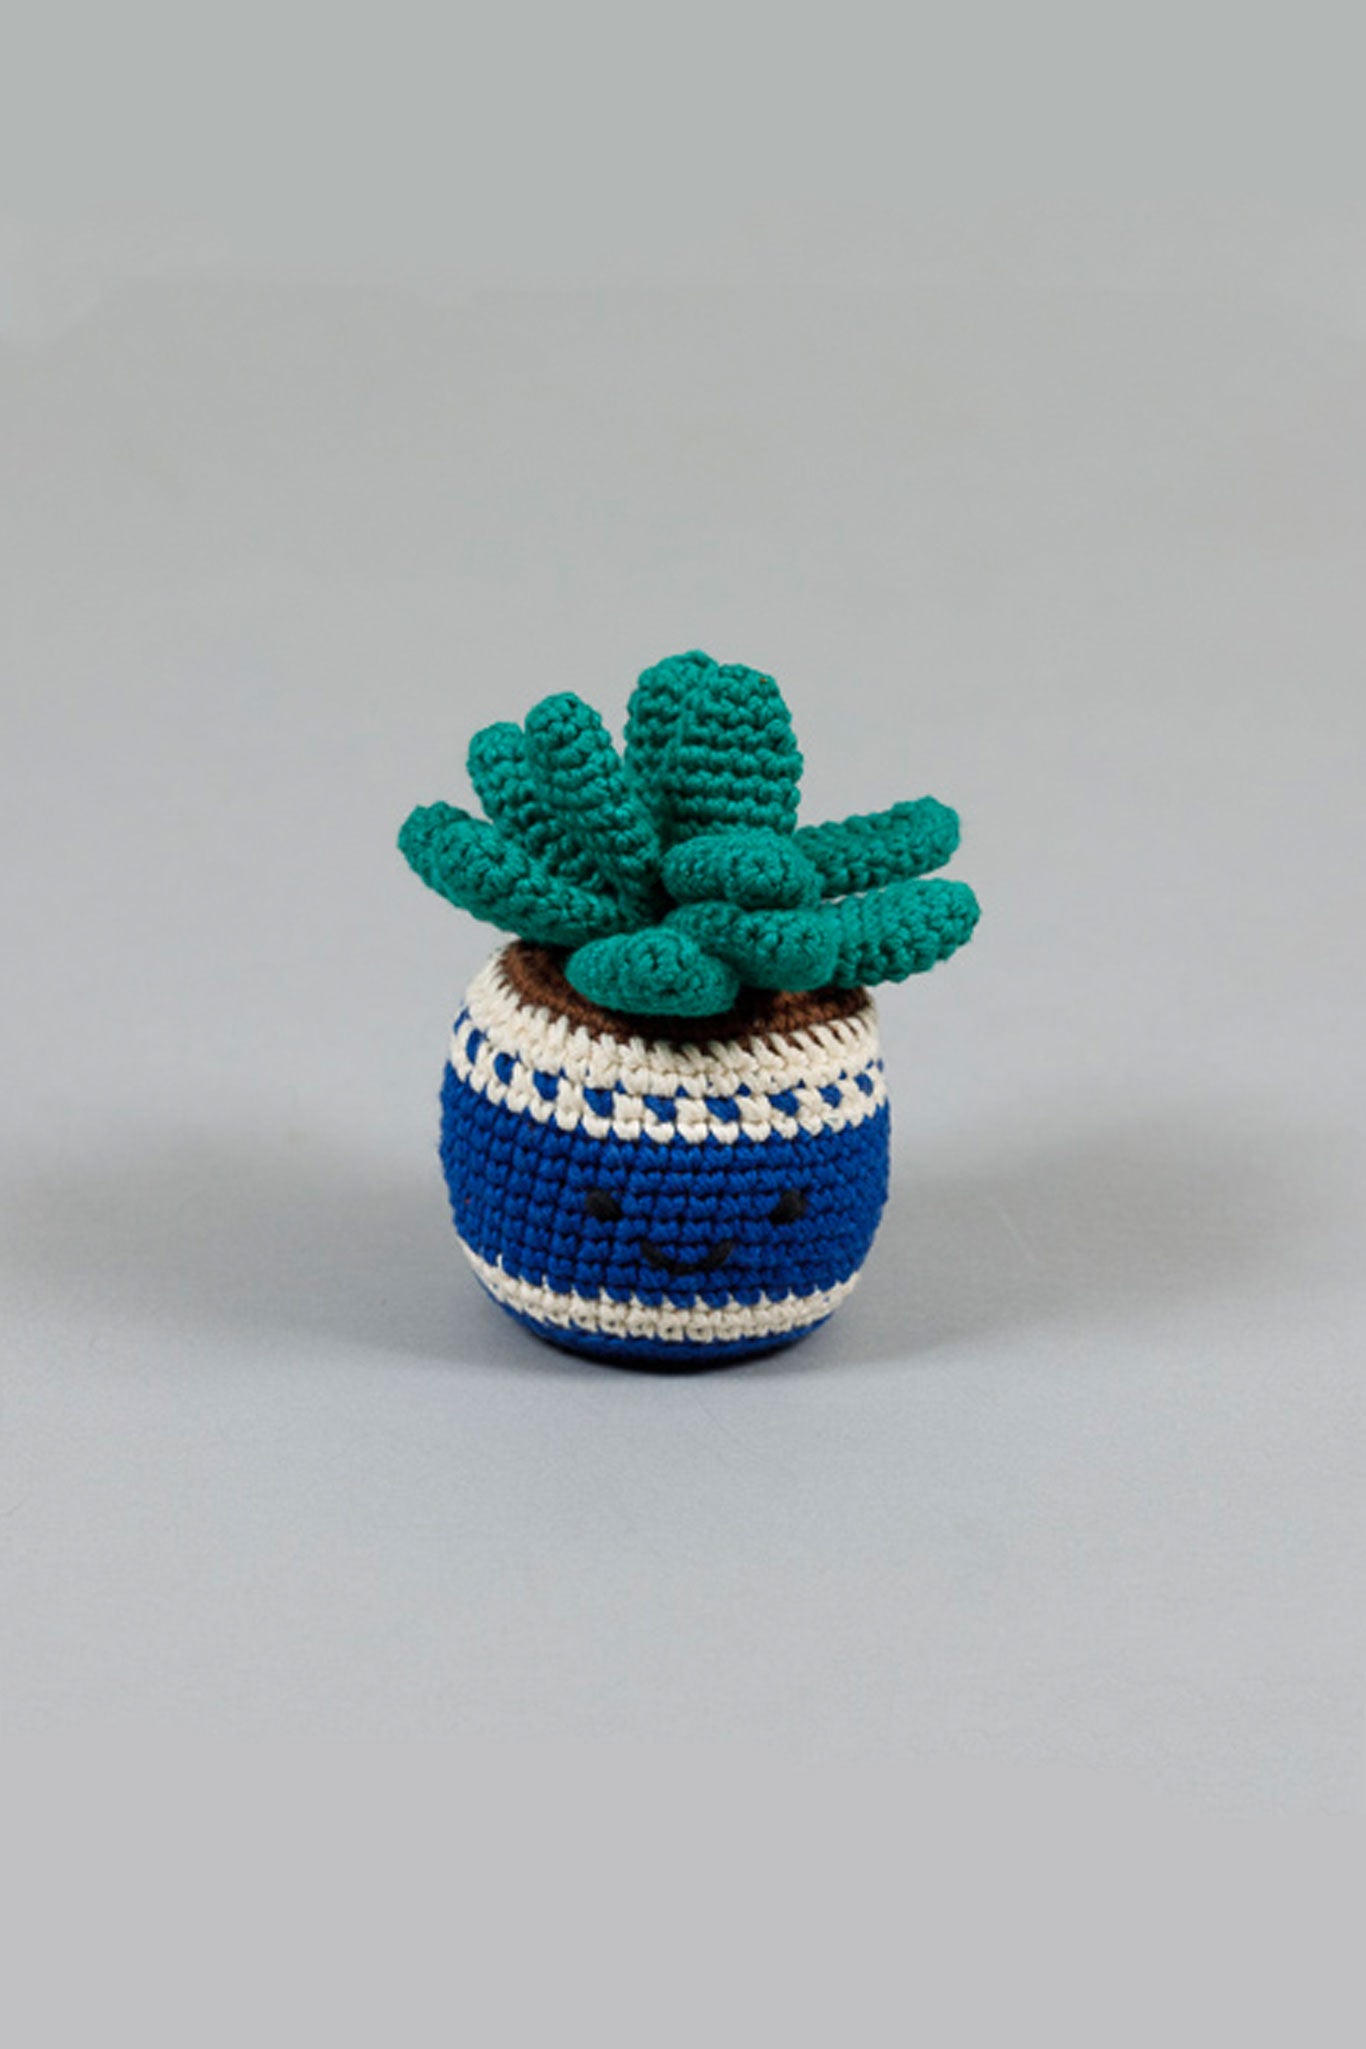 Ware of the Dog Crochet Potted Cactus